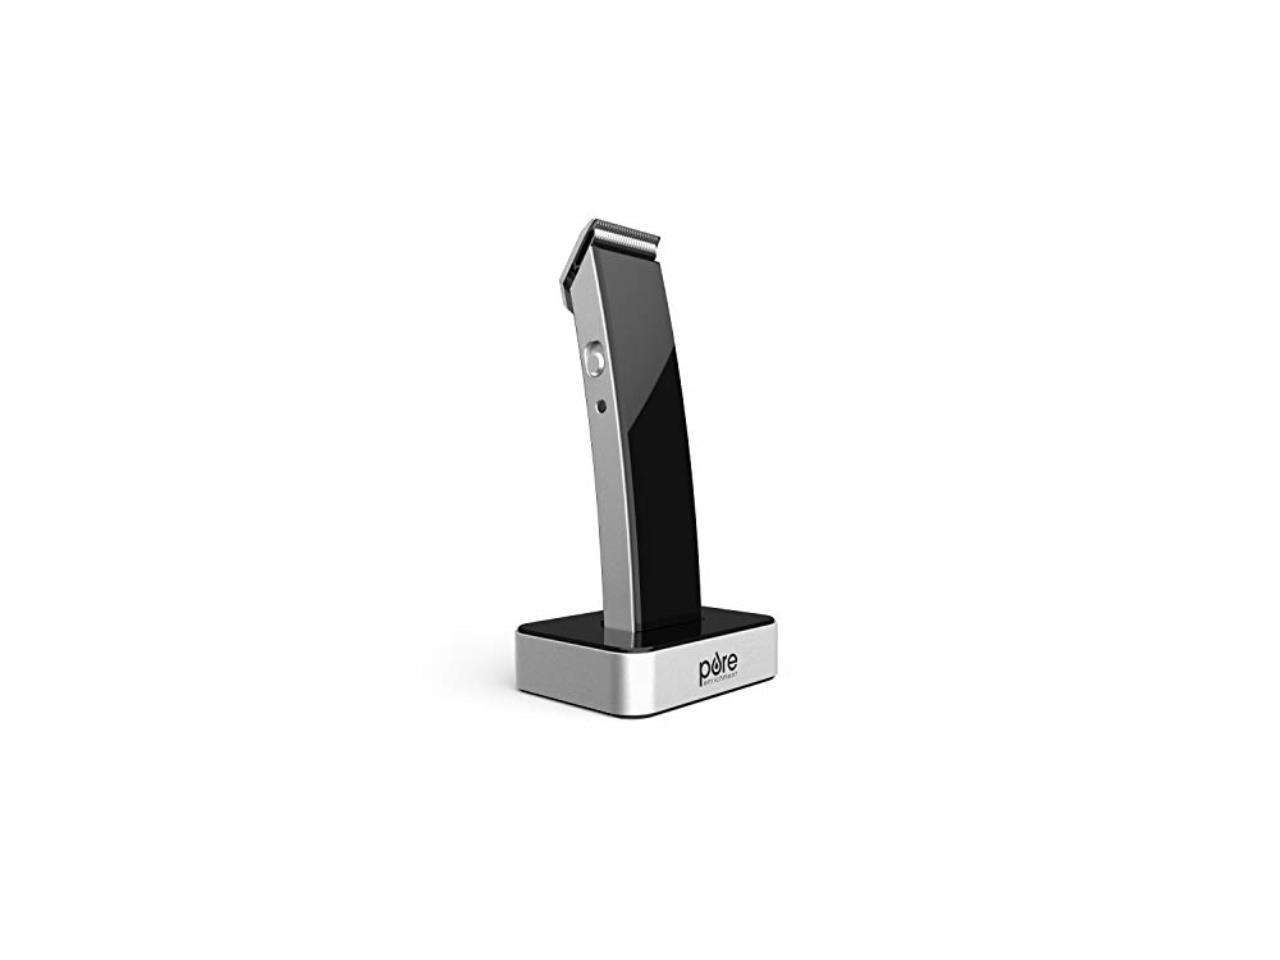 beard trimmer usb charger